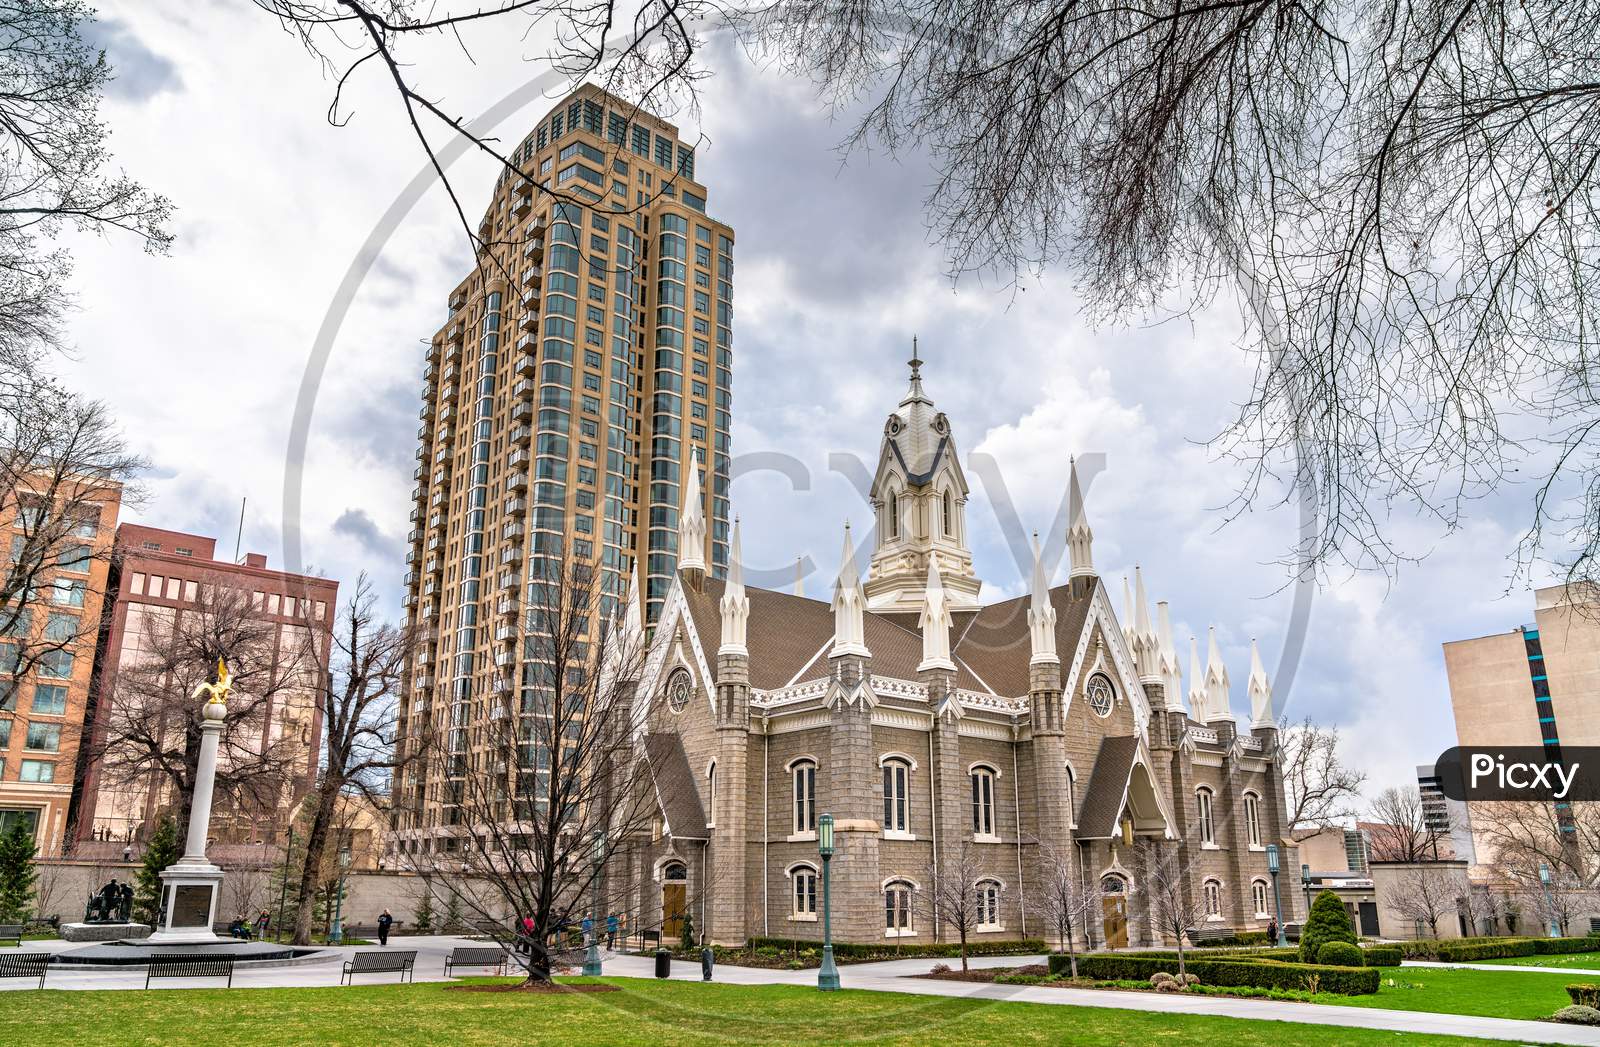 The Salt Lake Assembly Hall, A Victorian Gothic Congregation Hall